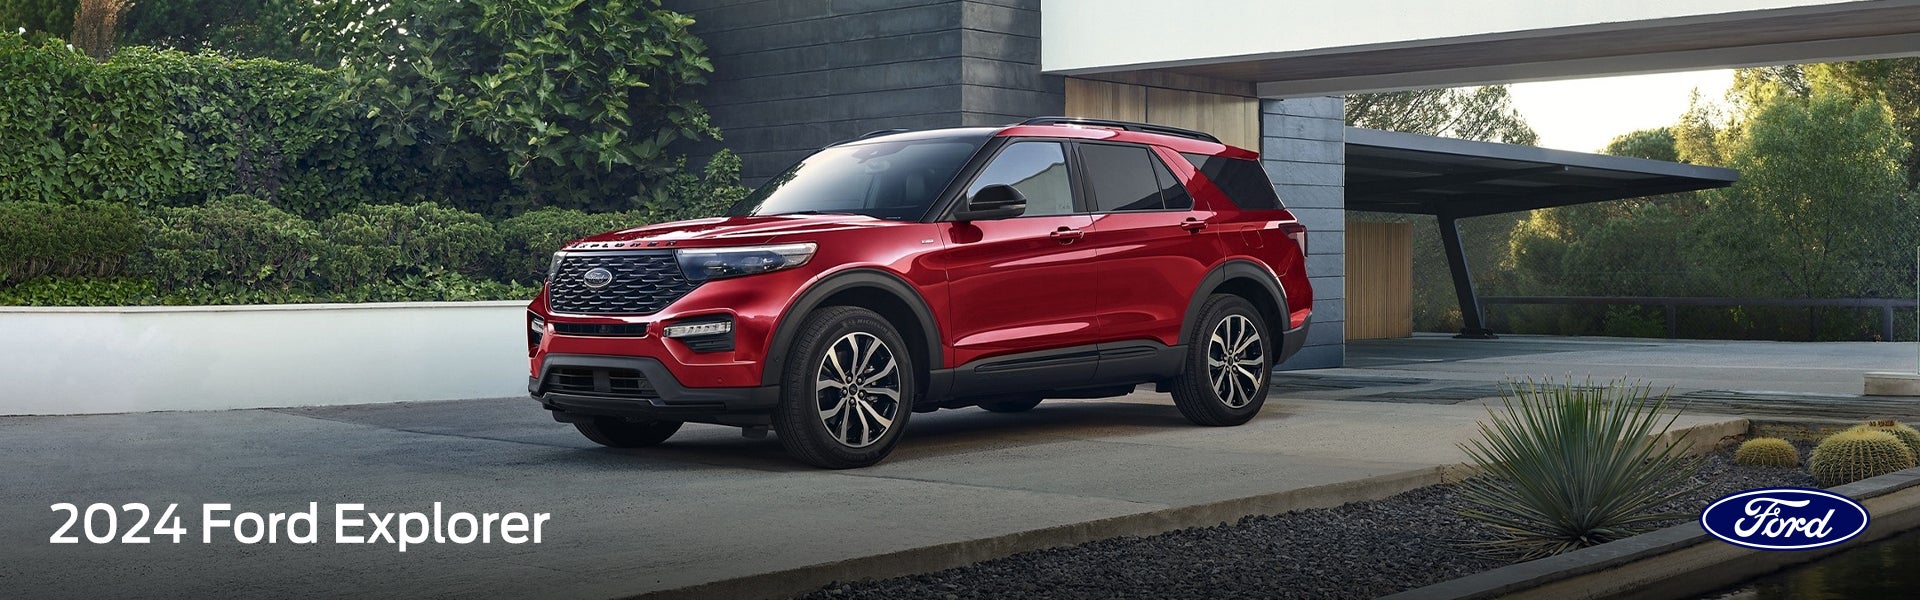 2023 Ford Explorer Available at Coughlin Ford of Circleville